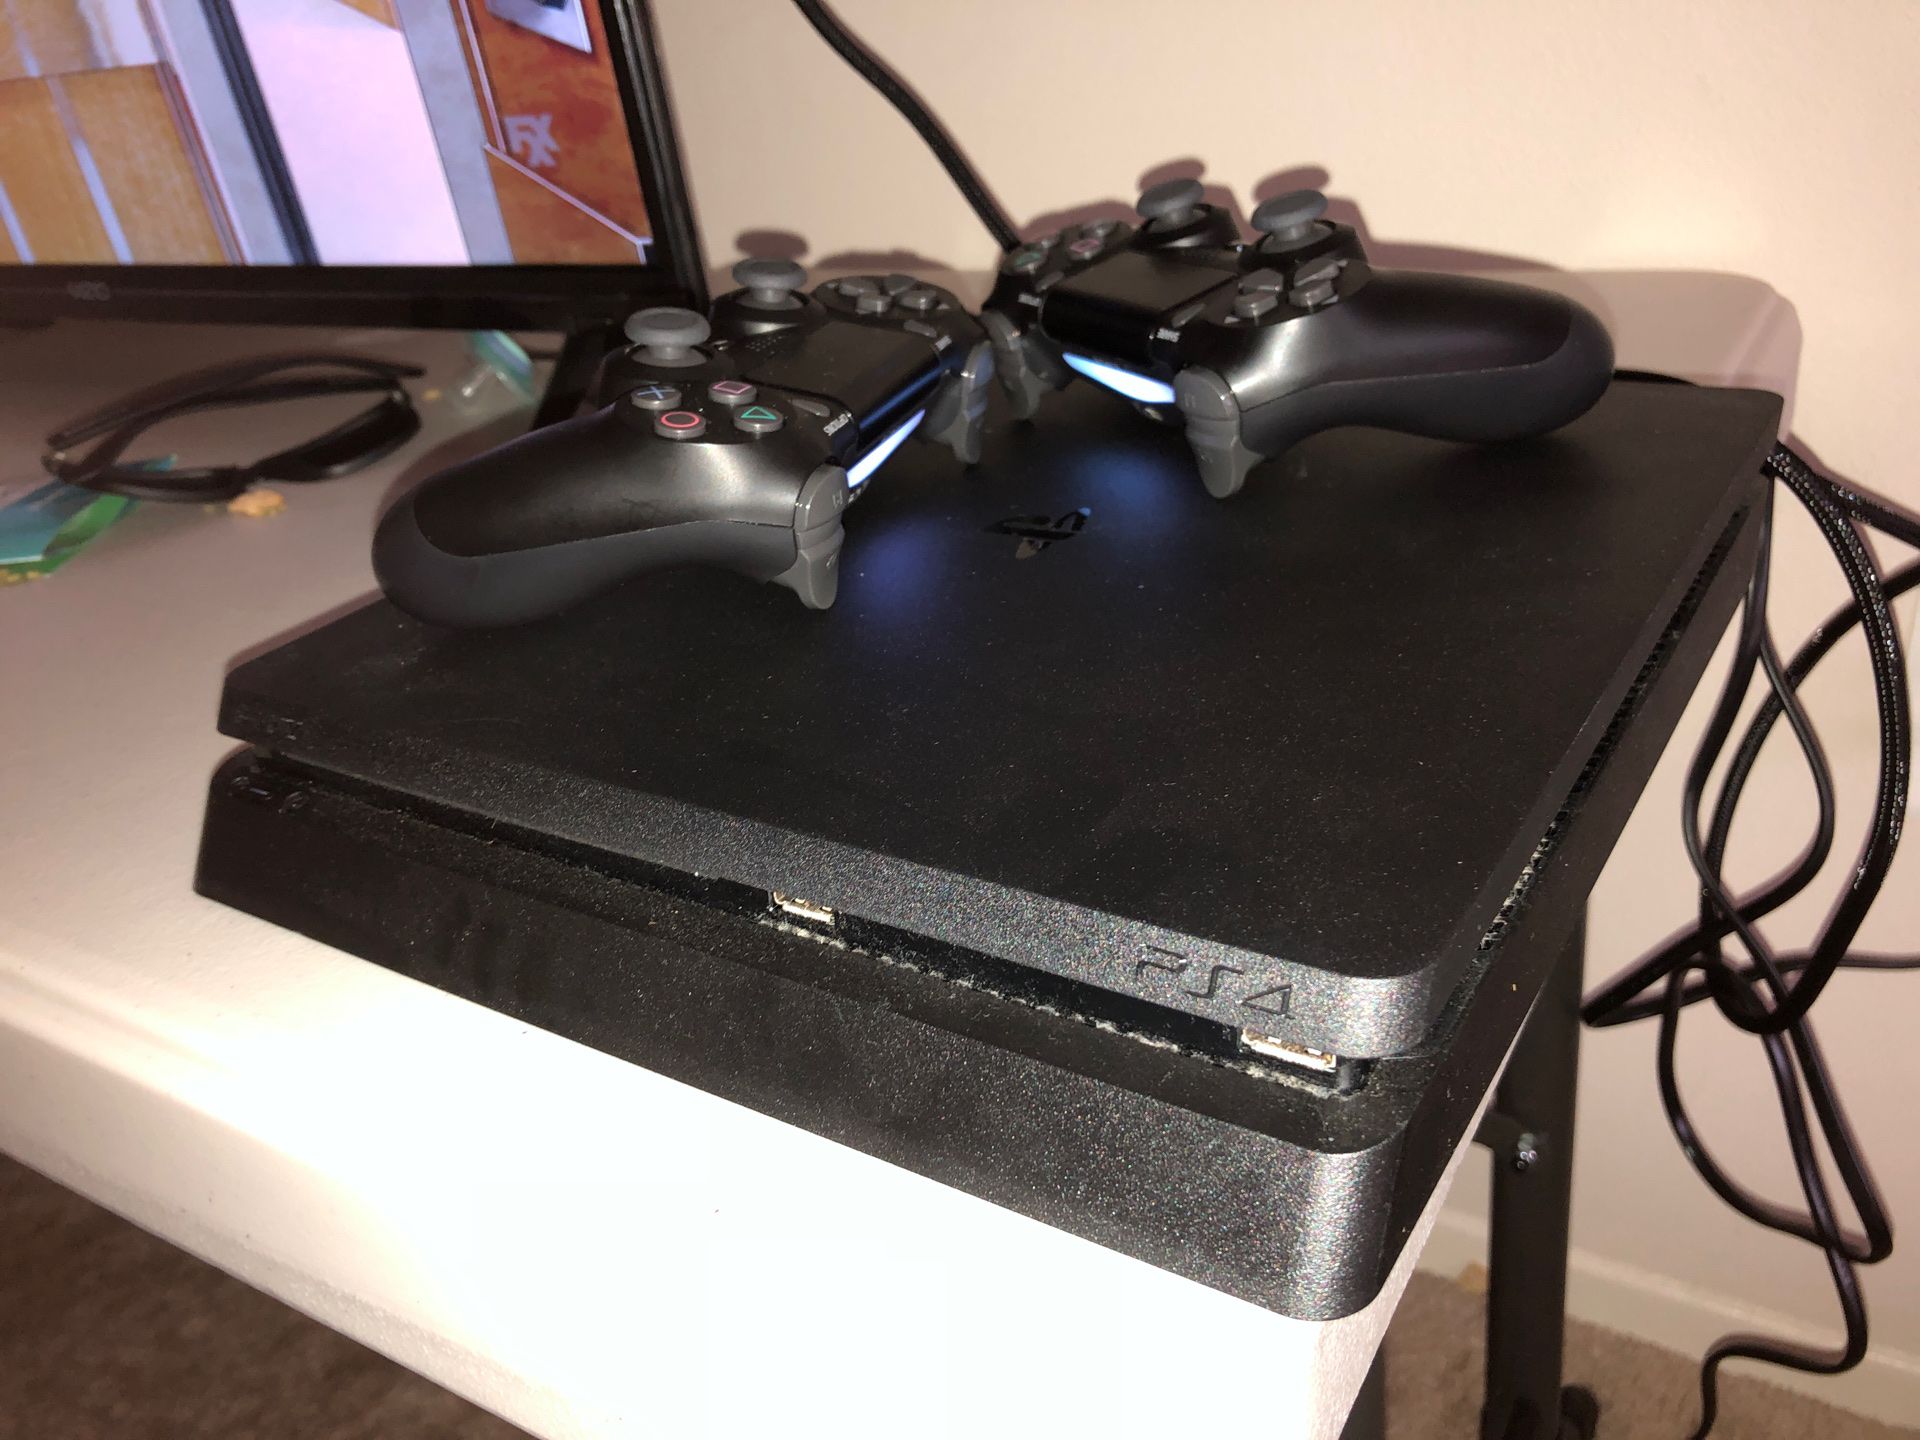 Perfect condition PS4 chords included plus two controllers